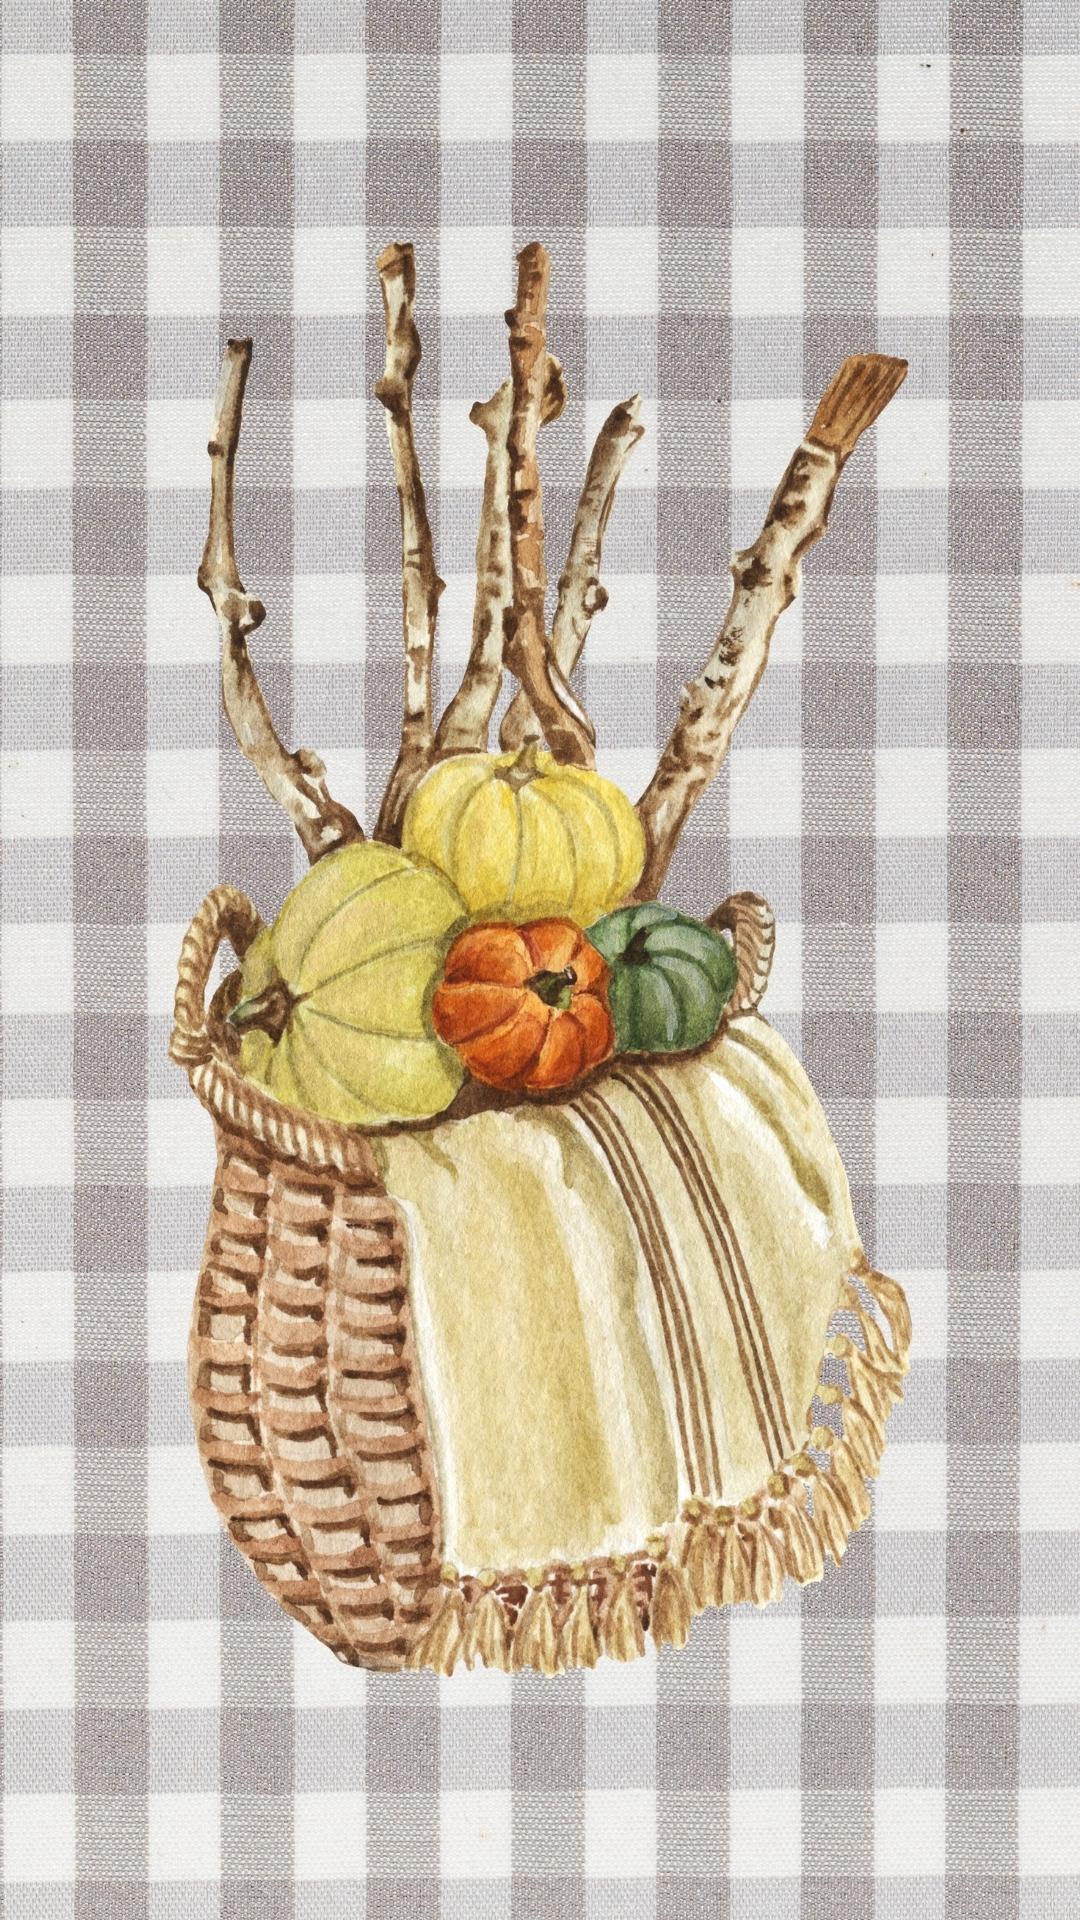 Gray buffalo check plaid iPhone background for fall with pumpkins and sticks in a basket.